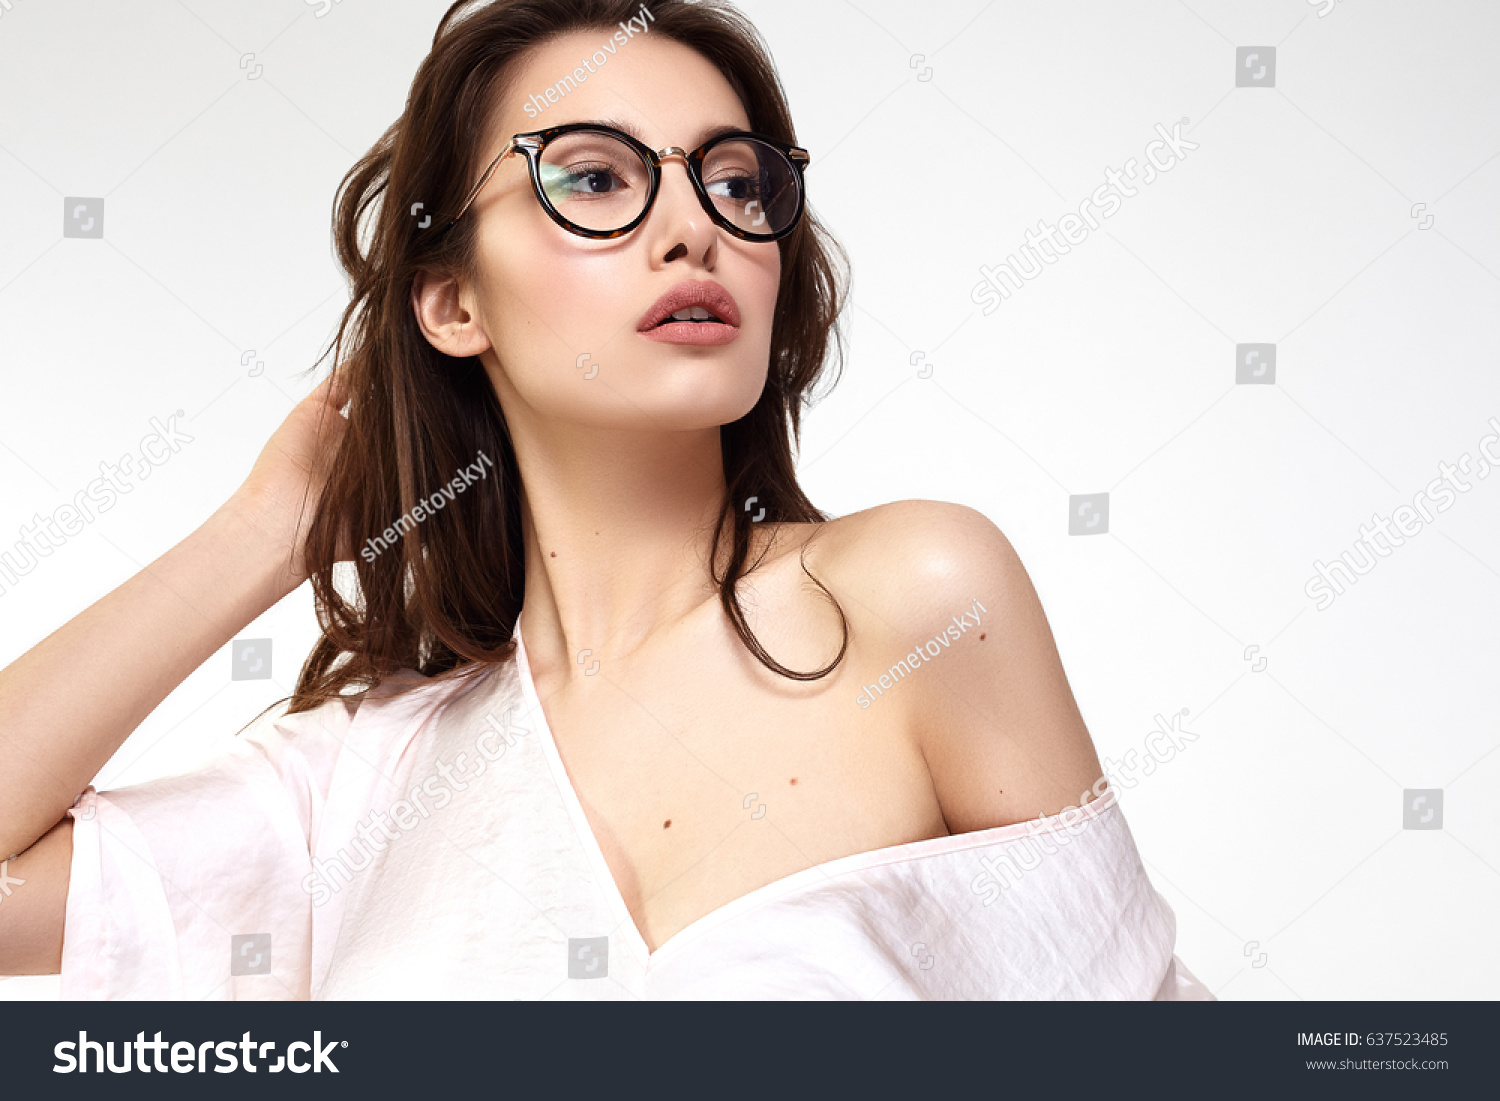 Female Eye wear. Attractive Brunette Girl With Natural Face Makeup In Transparent Glasses Frame. #637523485